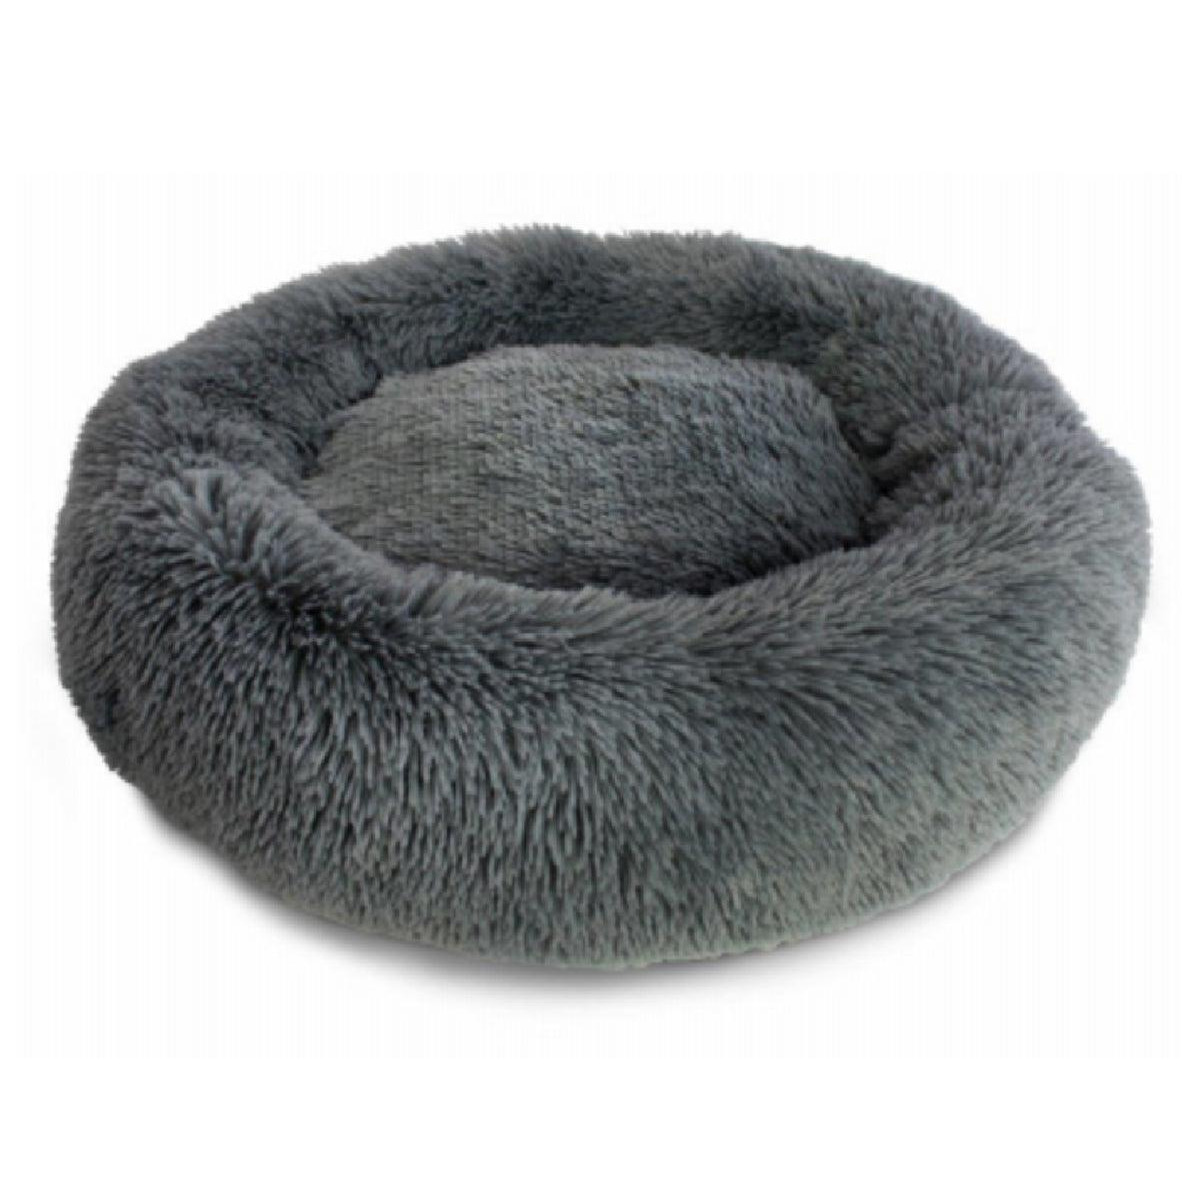 European Home Designs 100634 Round Shaggy Pet Bed, Assorted Color - Extra Large